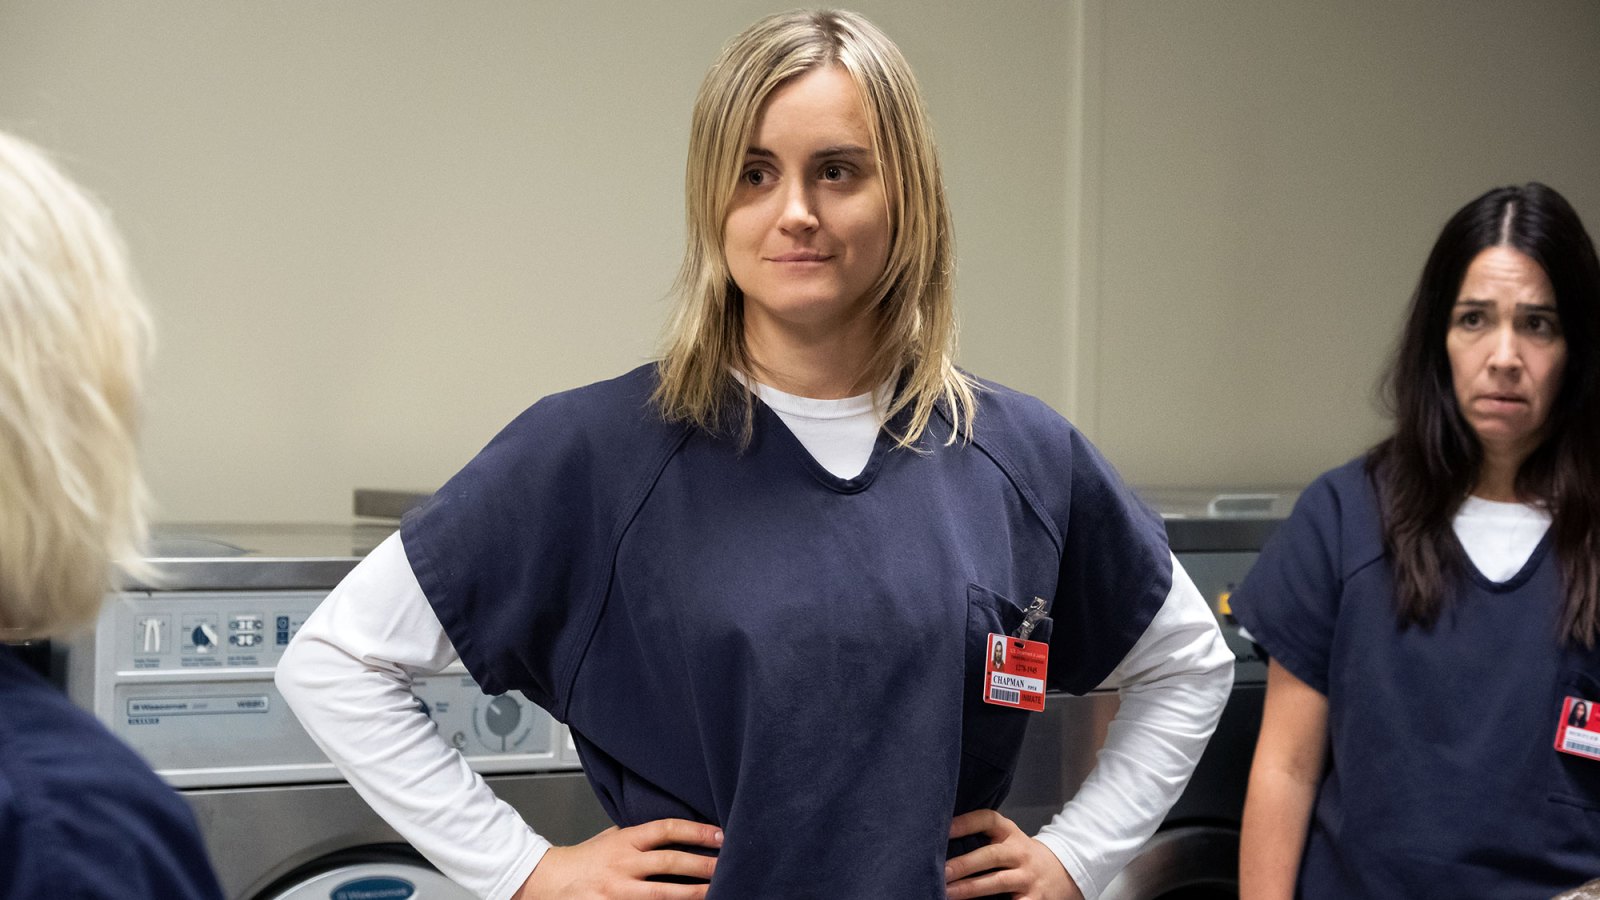 Taylor Schilling Was Ready for ‘Orange Is the New Black’ to End: ‘7 Years Is a Long Time’